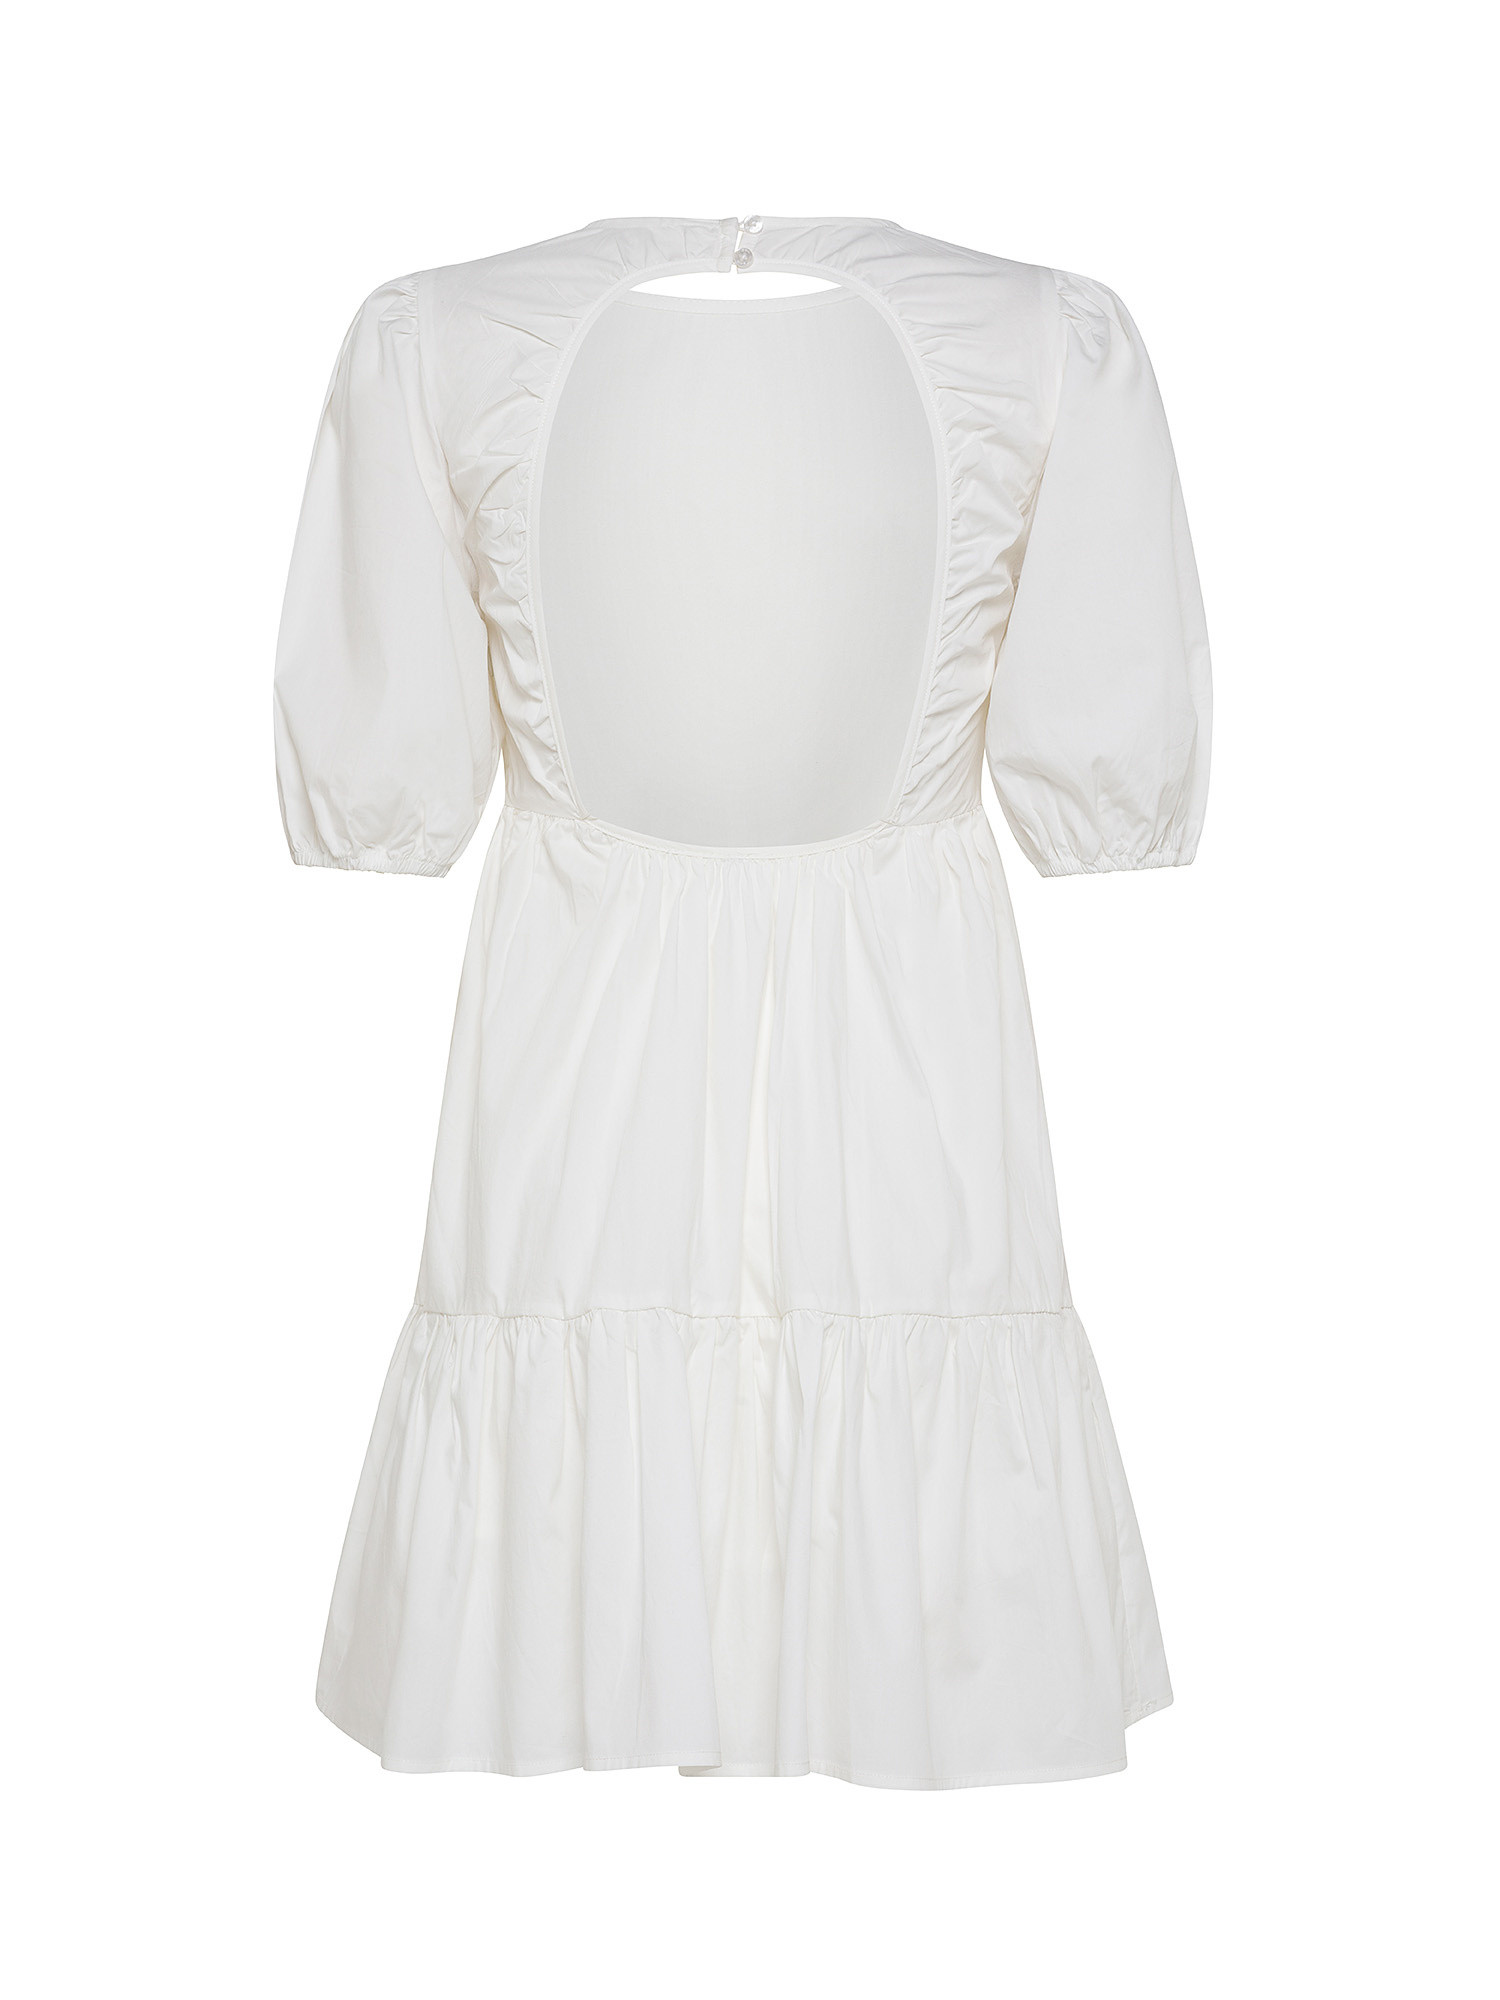 Pepe Jeans - Dress with back neckline in cotton, White, large image number 1